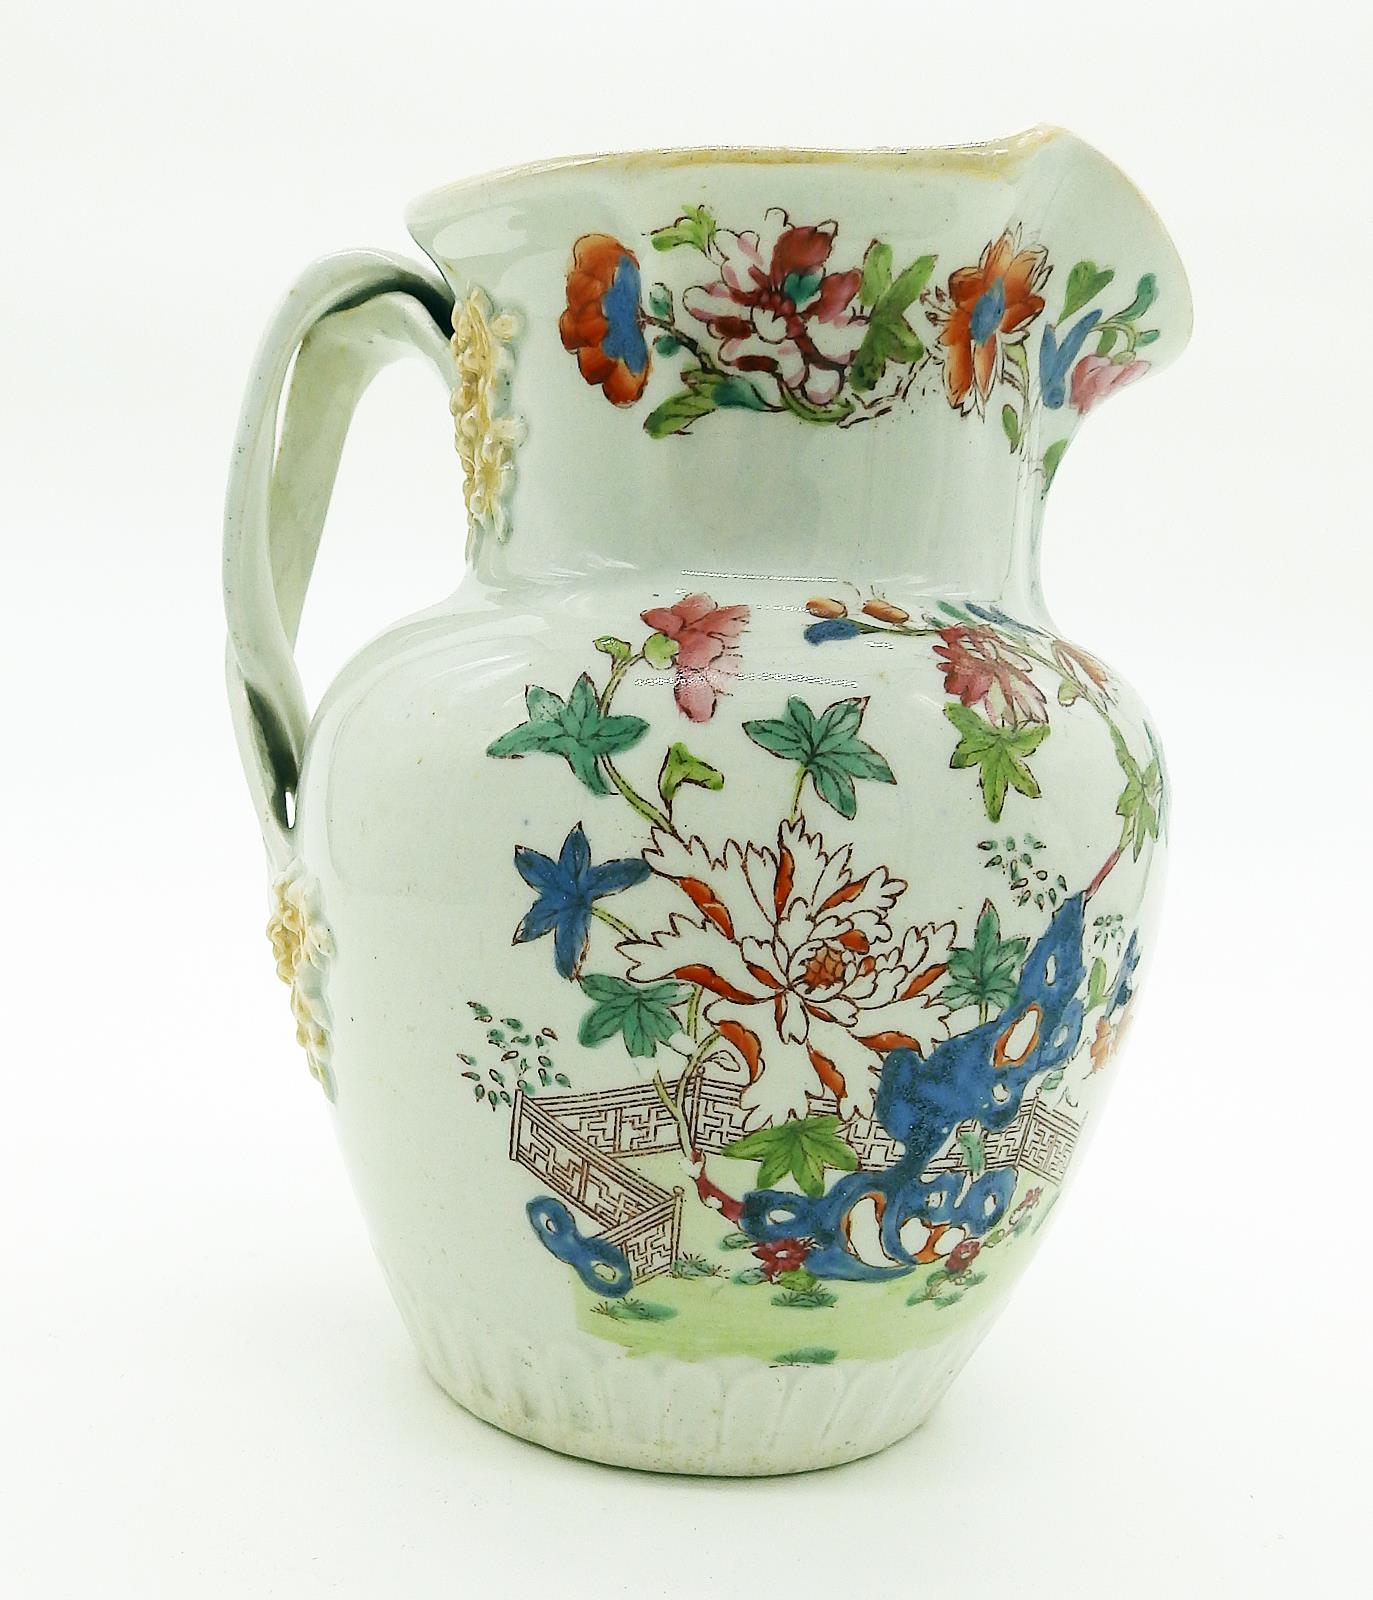 An unusual Mason's type ironstonstone pottery Jug C early 19thC - Image 2 of 6